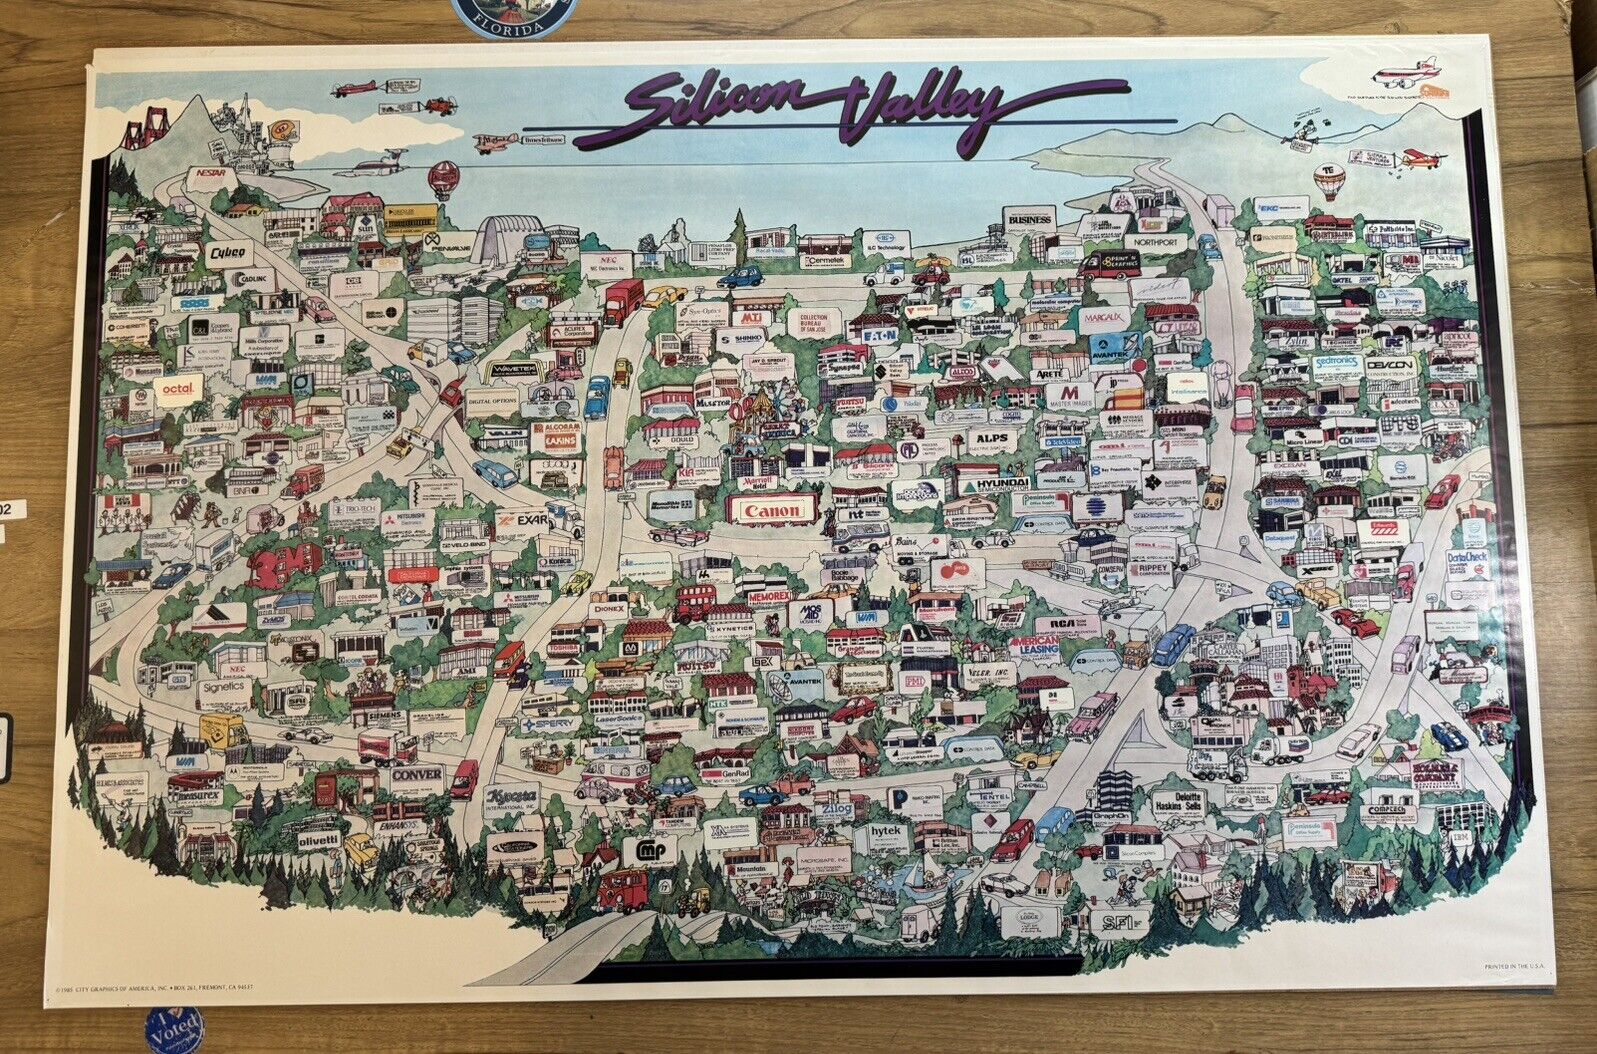 Vintage 1985 Silicon Valley Poster Birds Eye View Map Tech Start Up Companies